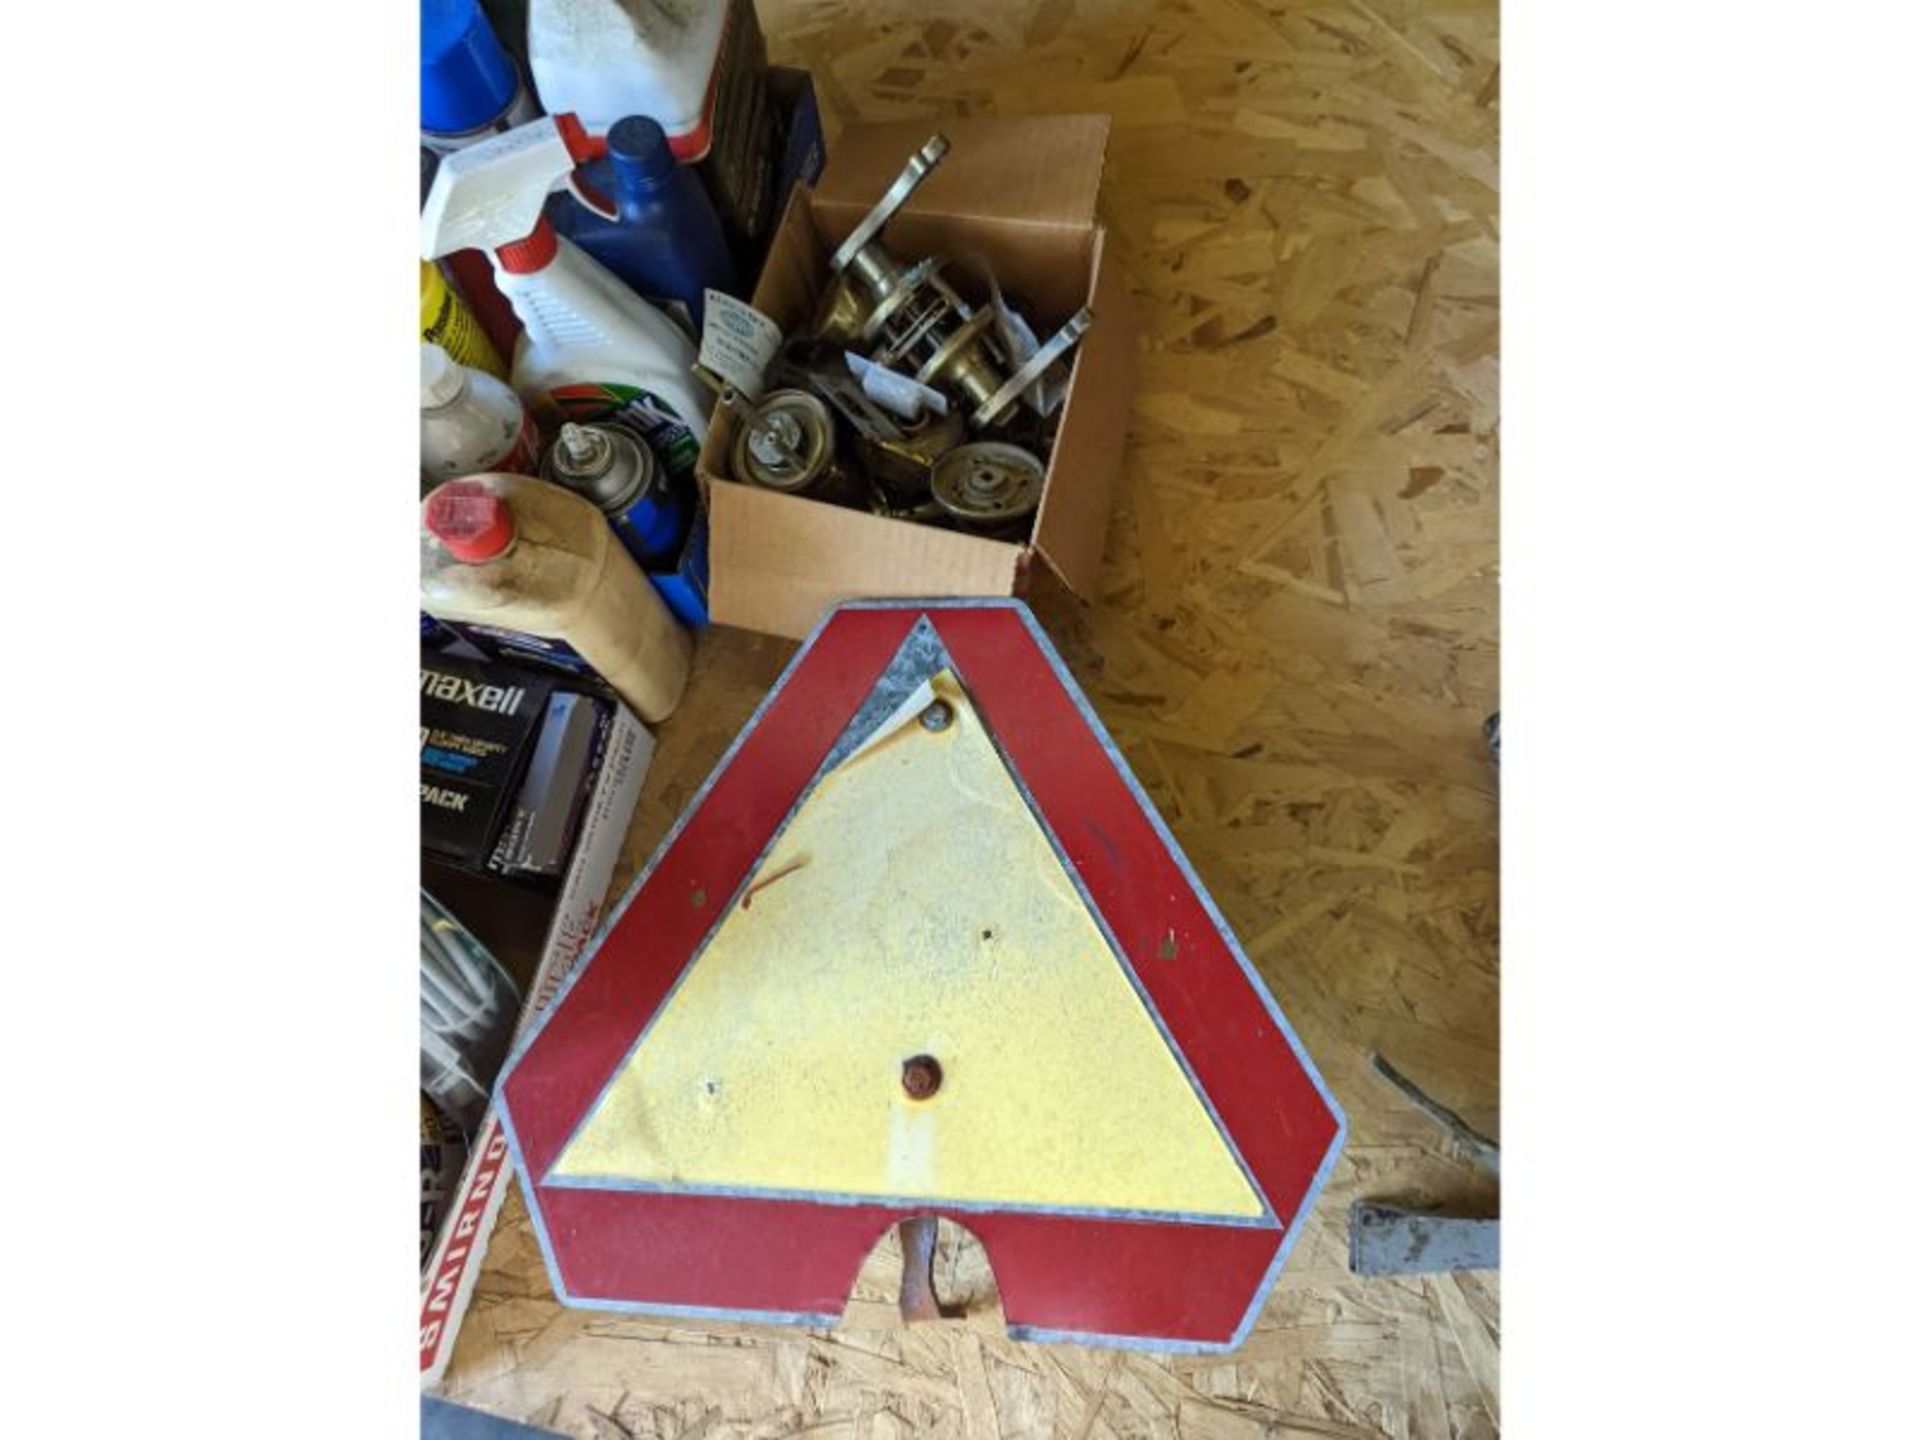 3 Flats Oil Filters, Oils, Grease, Door Handel's, Slow Moving Vehical Triangle - Image 2 of 4